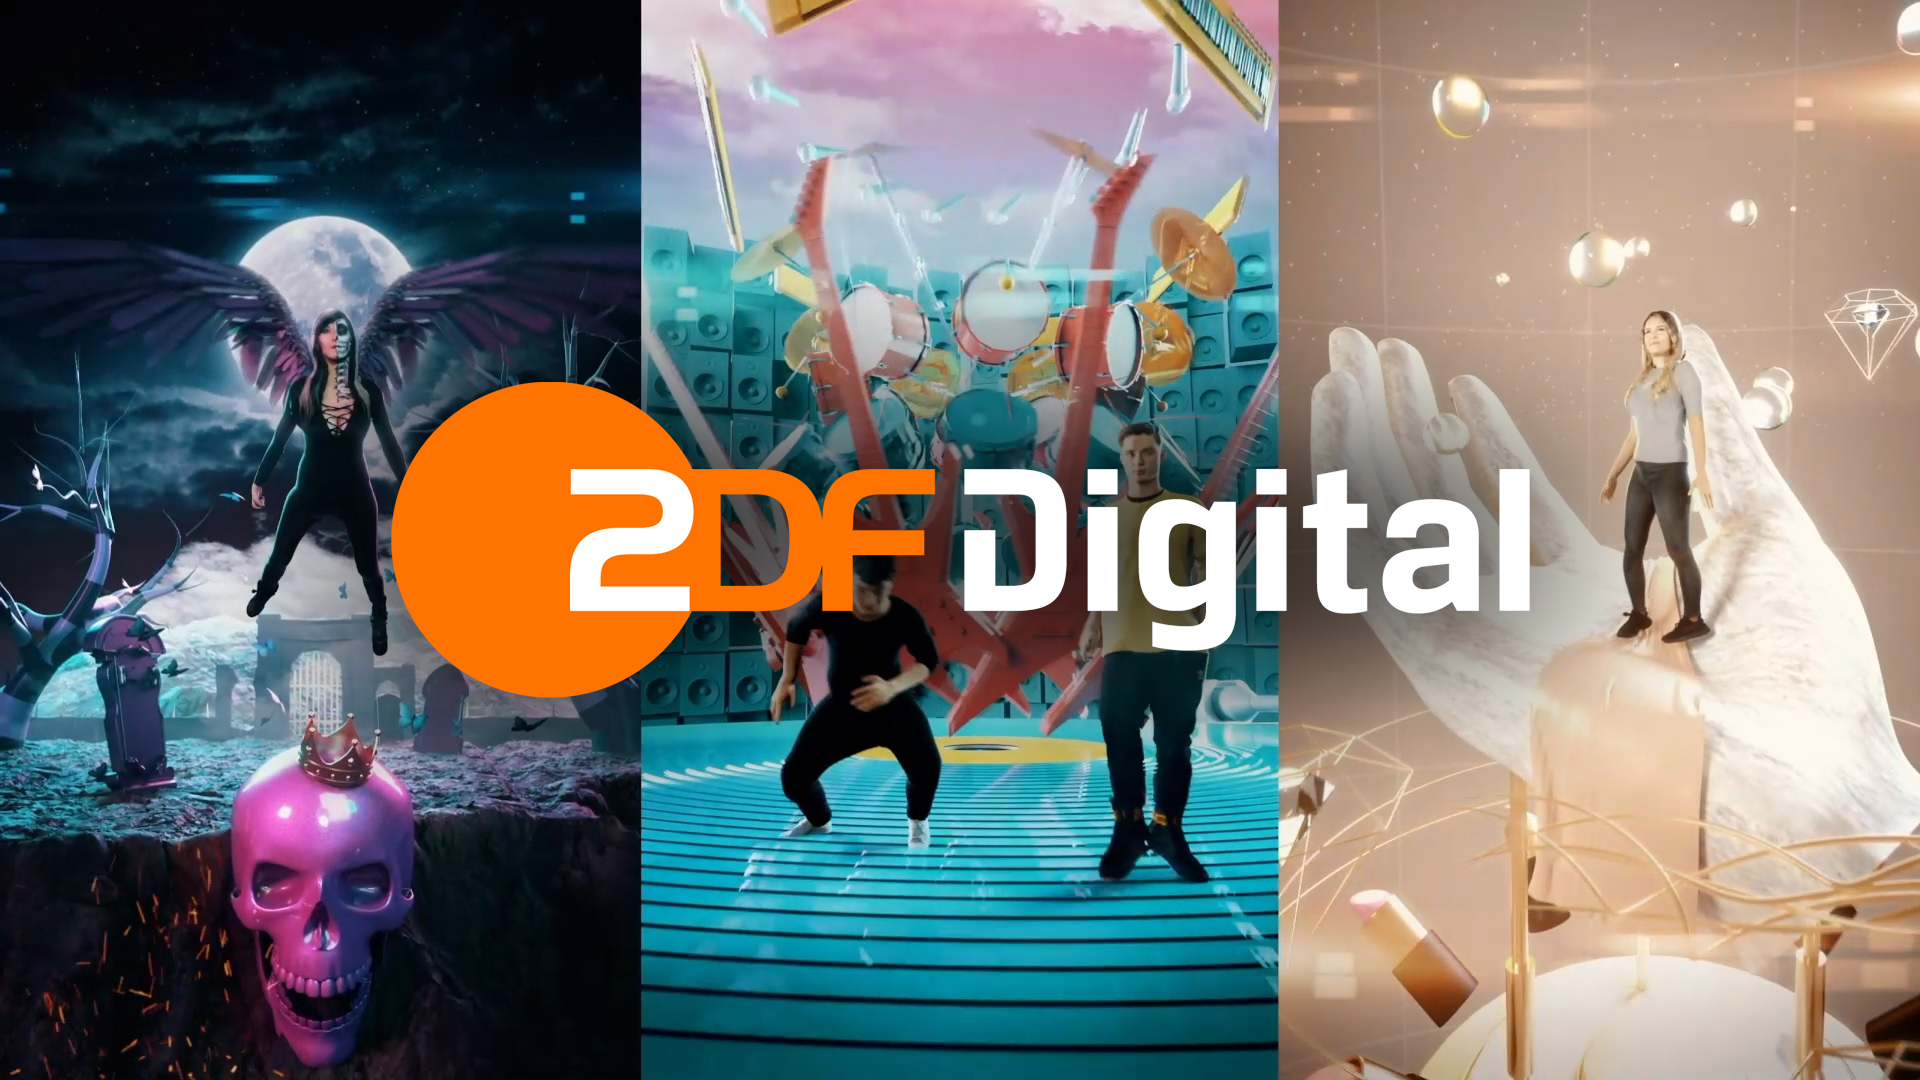 TV Creative Agency ZDF Digital adopts Real-time Animation Tools for Network  Production - Reallusion Magazine